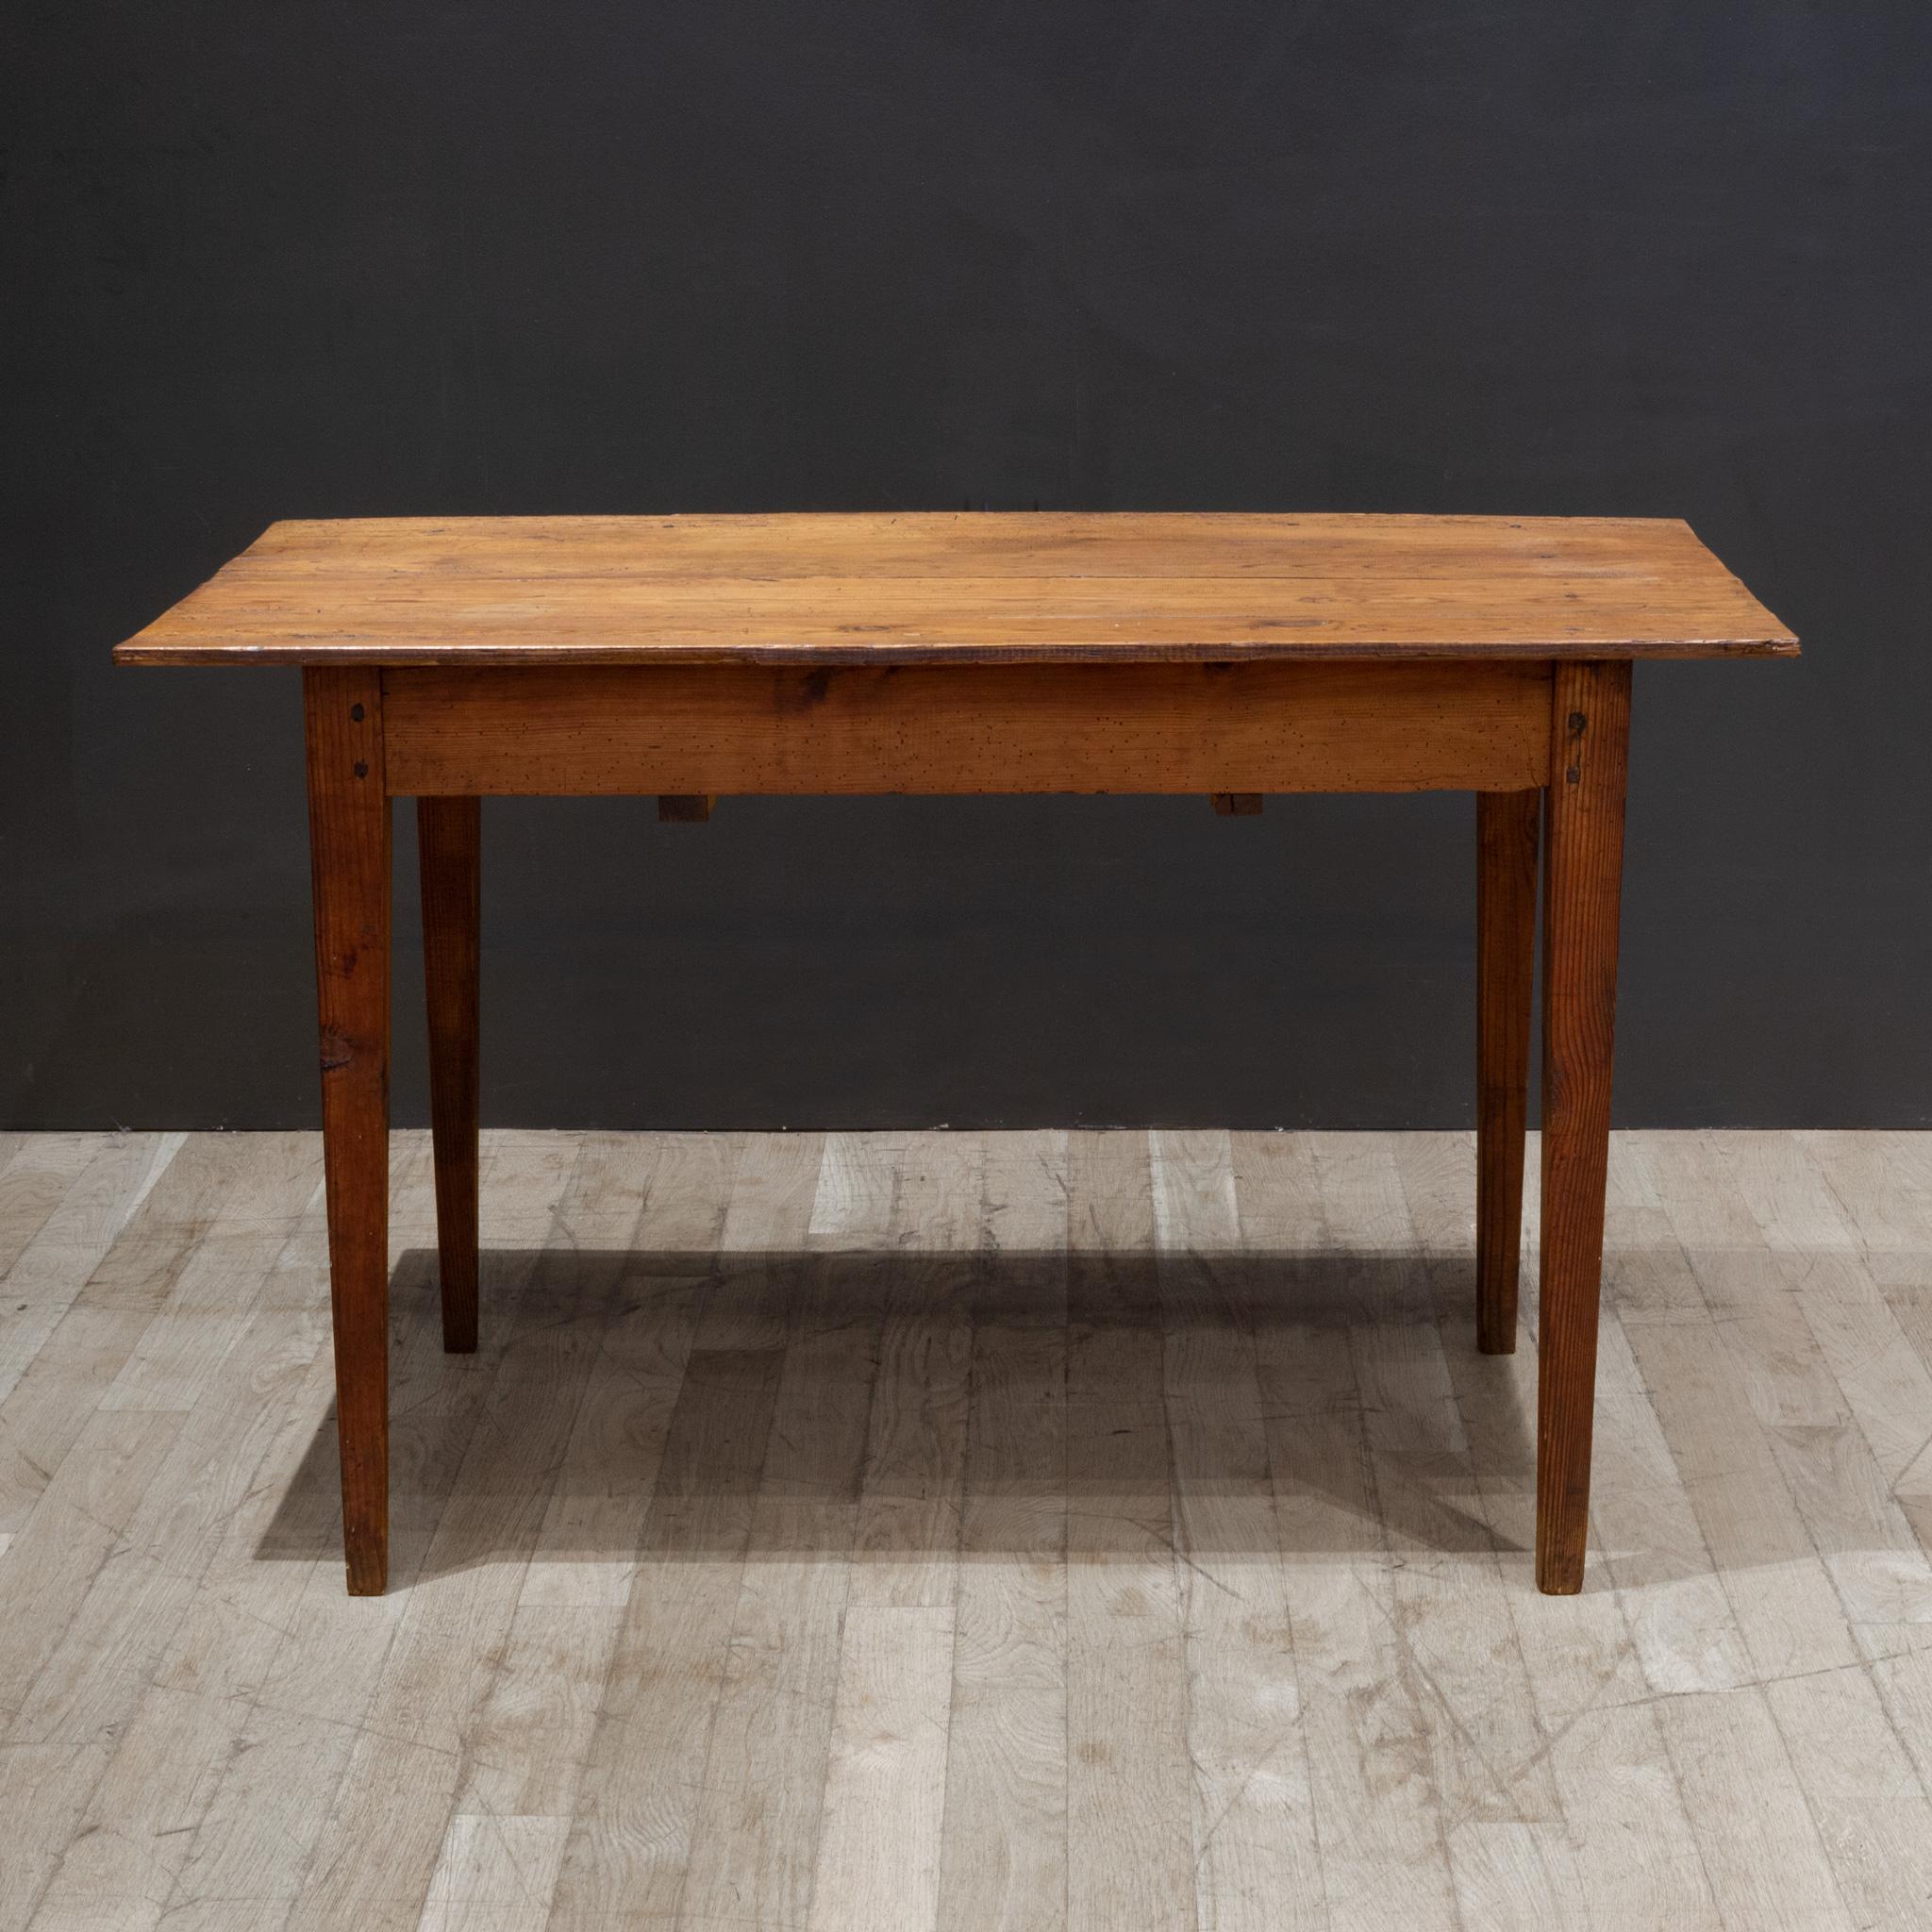 Pine 19th c. Rustic French Farmhouse Table c.1850-1900 For Sale